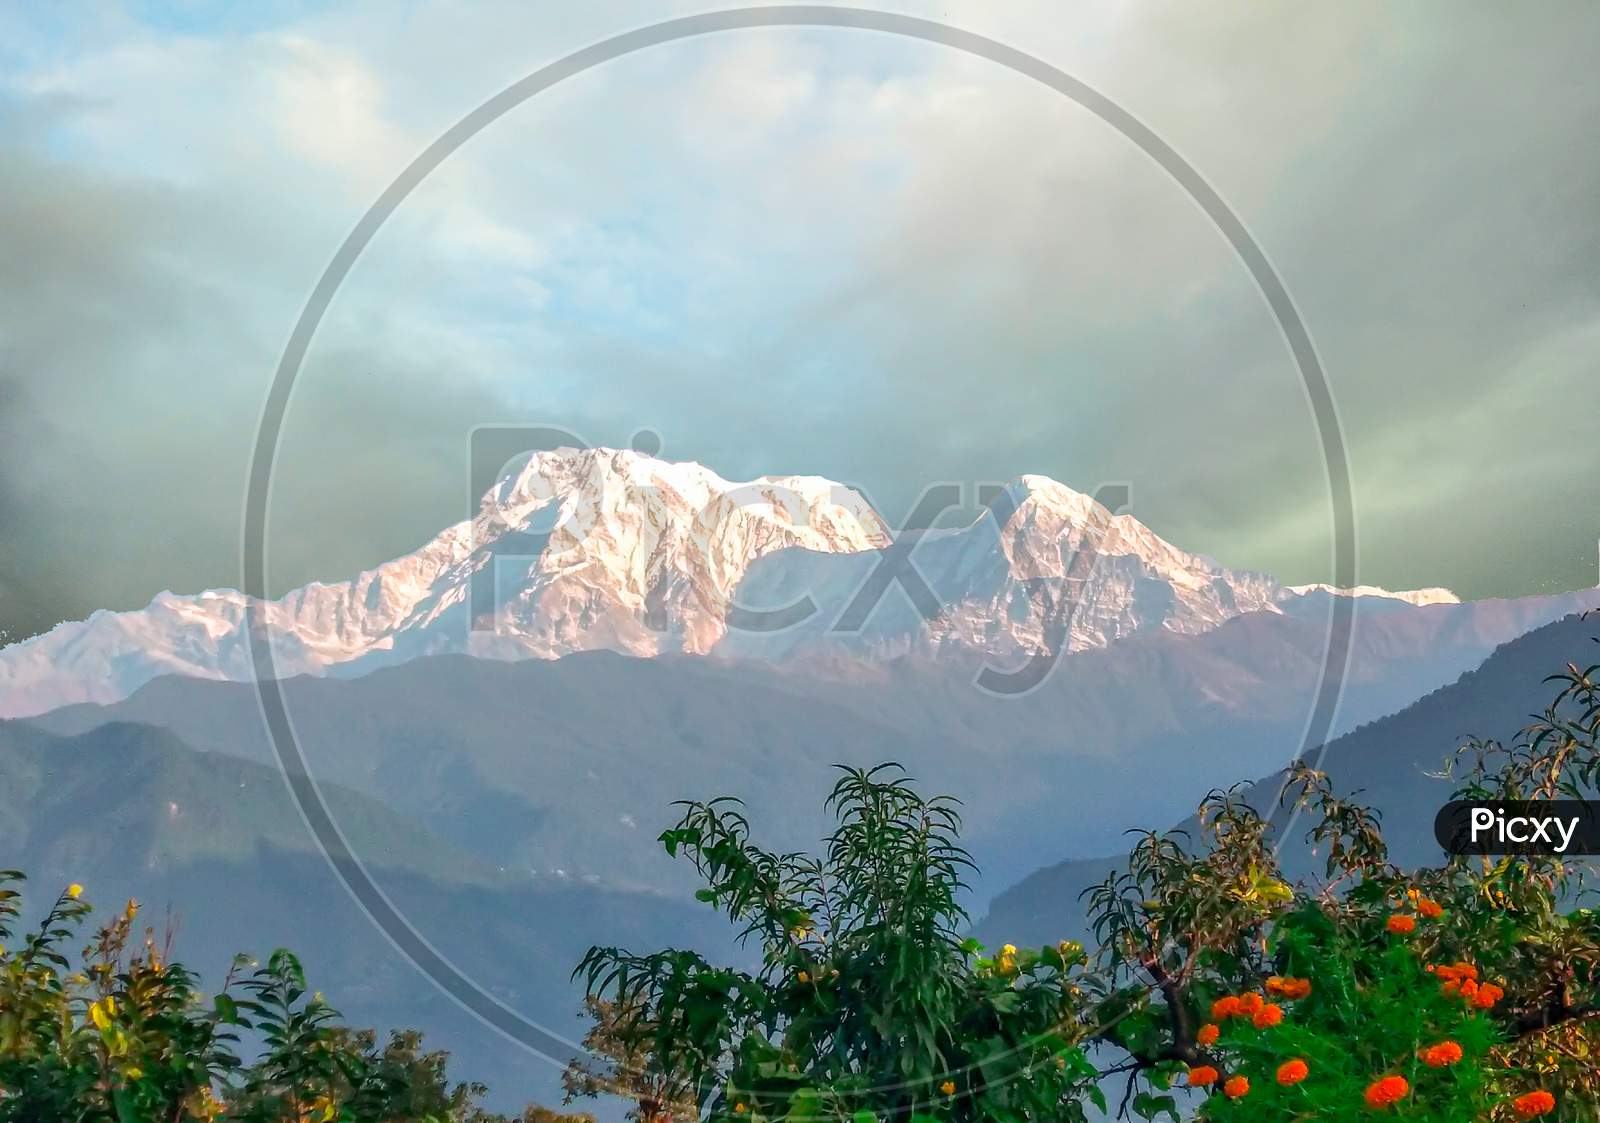 A beautiful machhapuchhre mountain with clouds of pokhara nepal. clicking at morning.